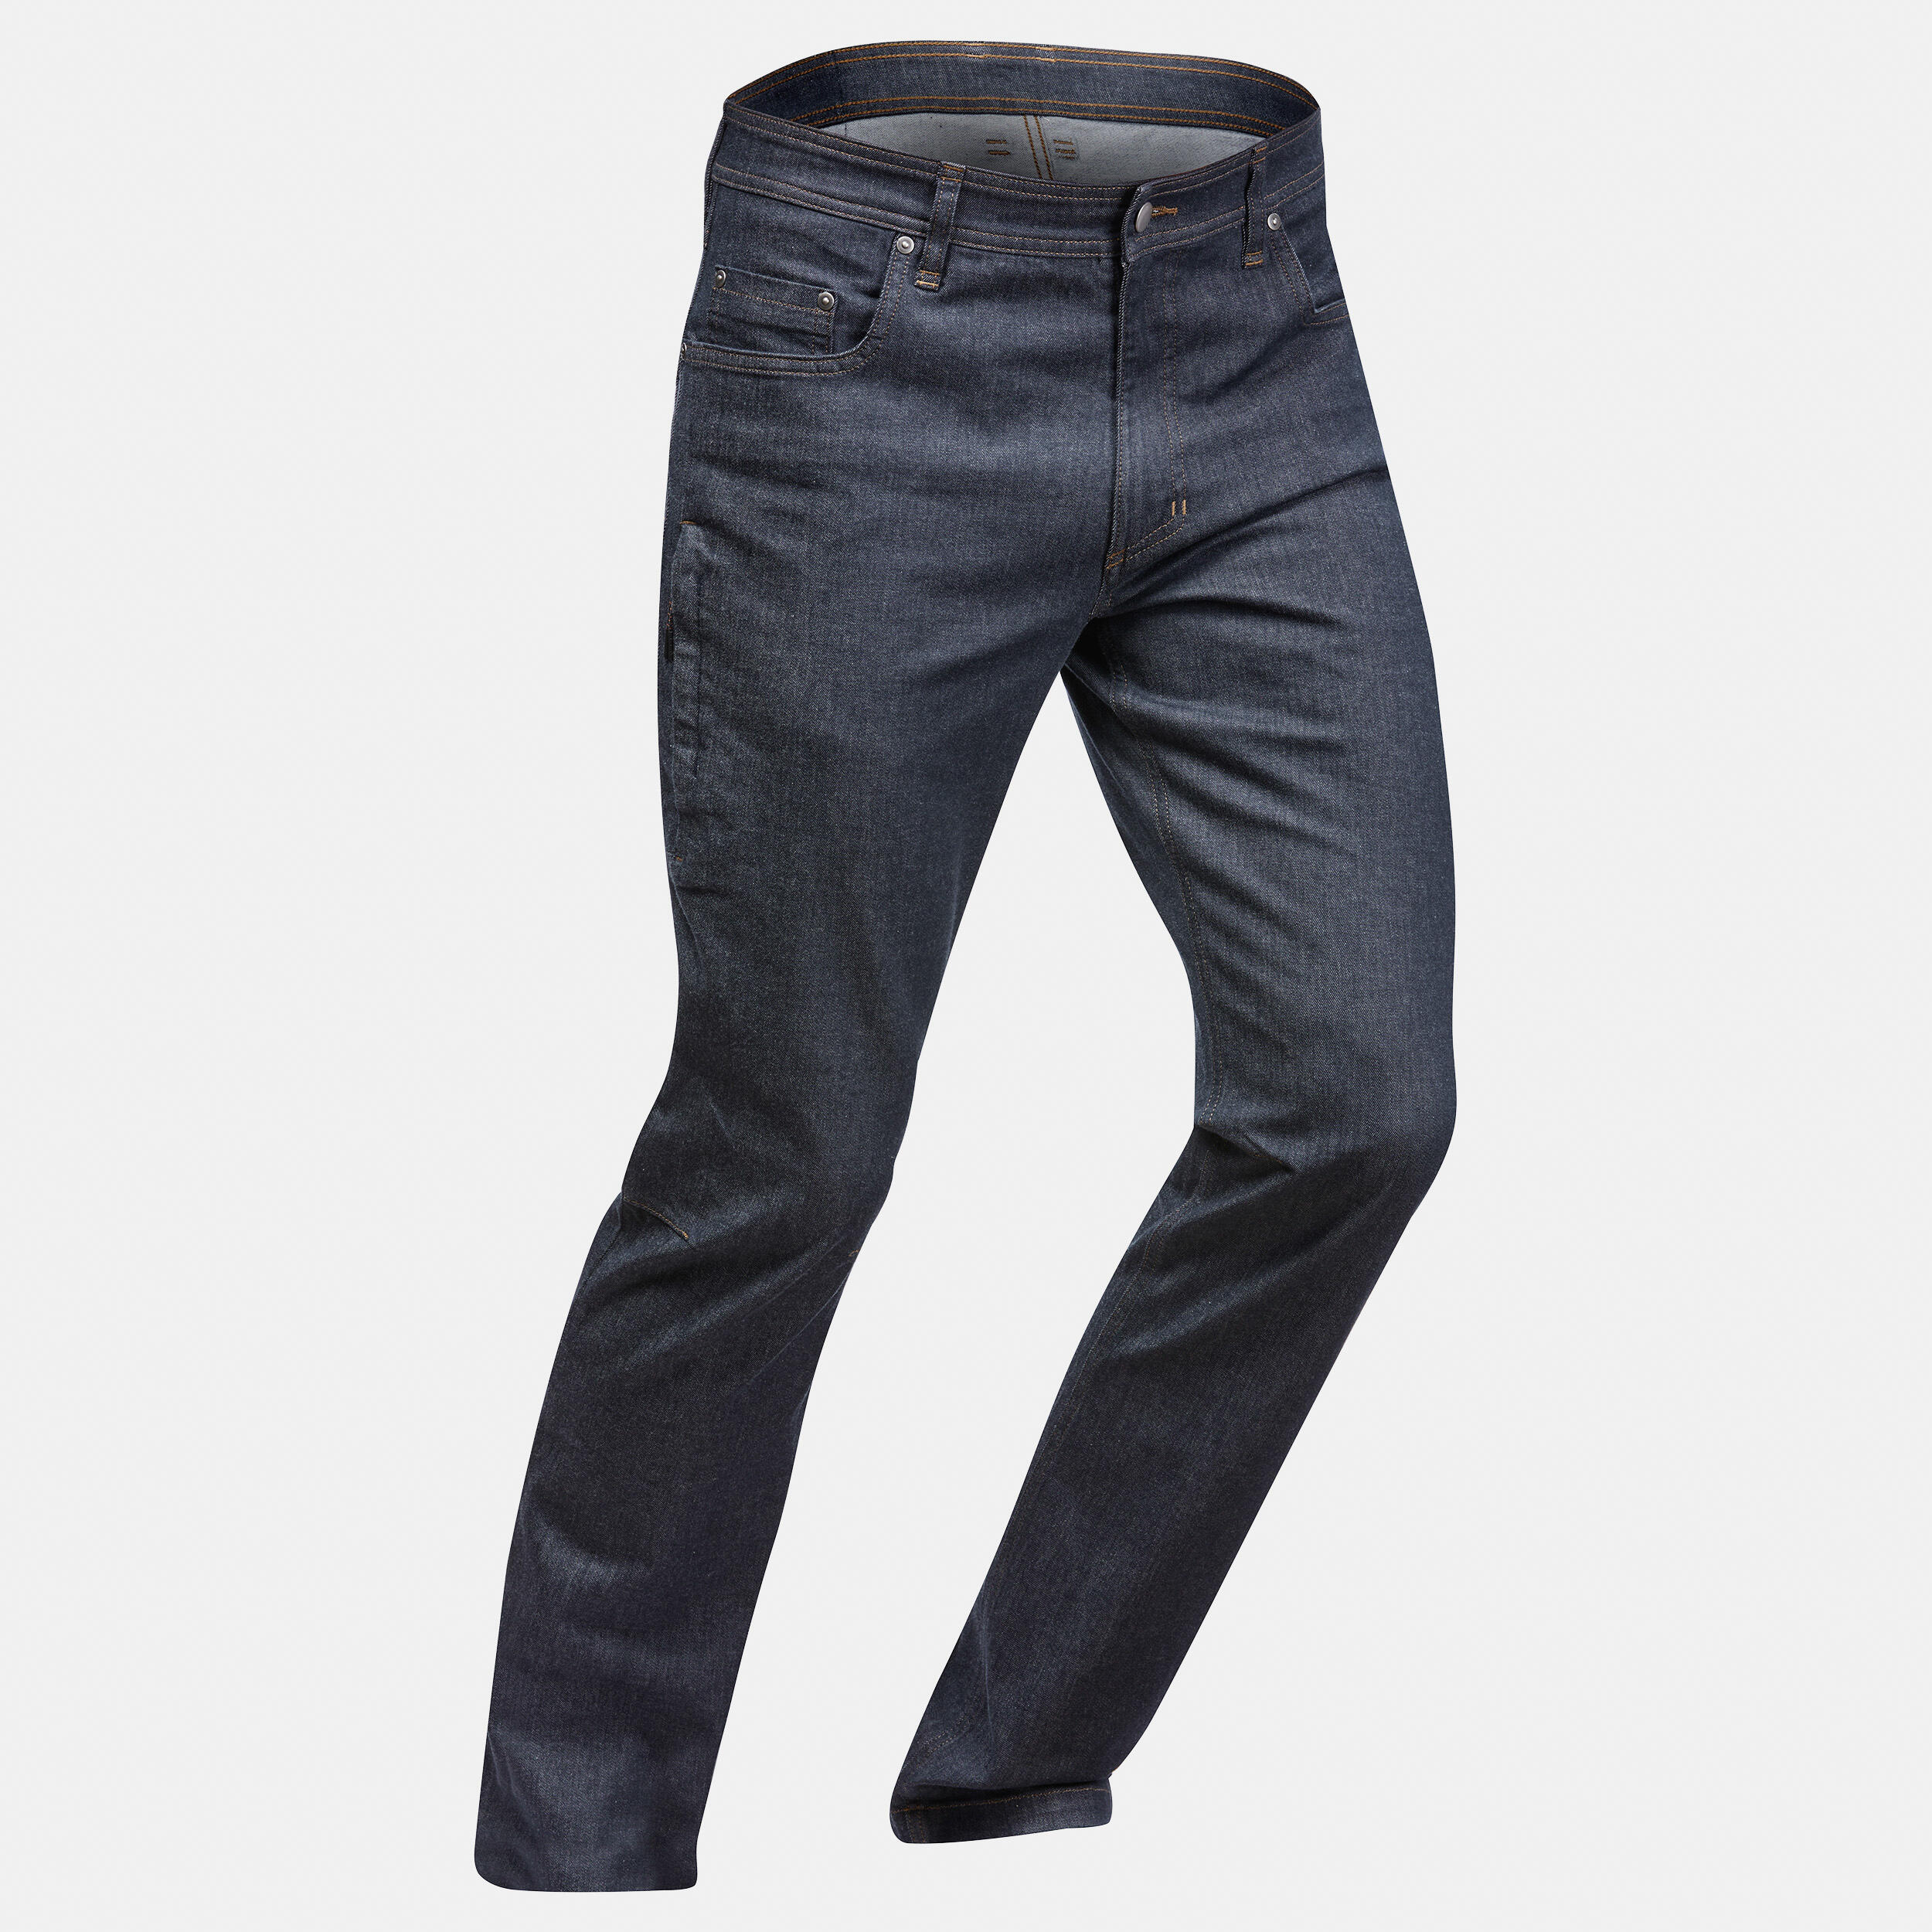 What's the quickest way to break in new jeans? | Stitch Fix Men